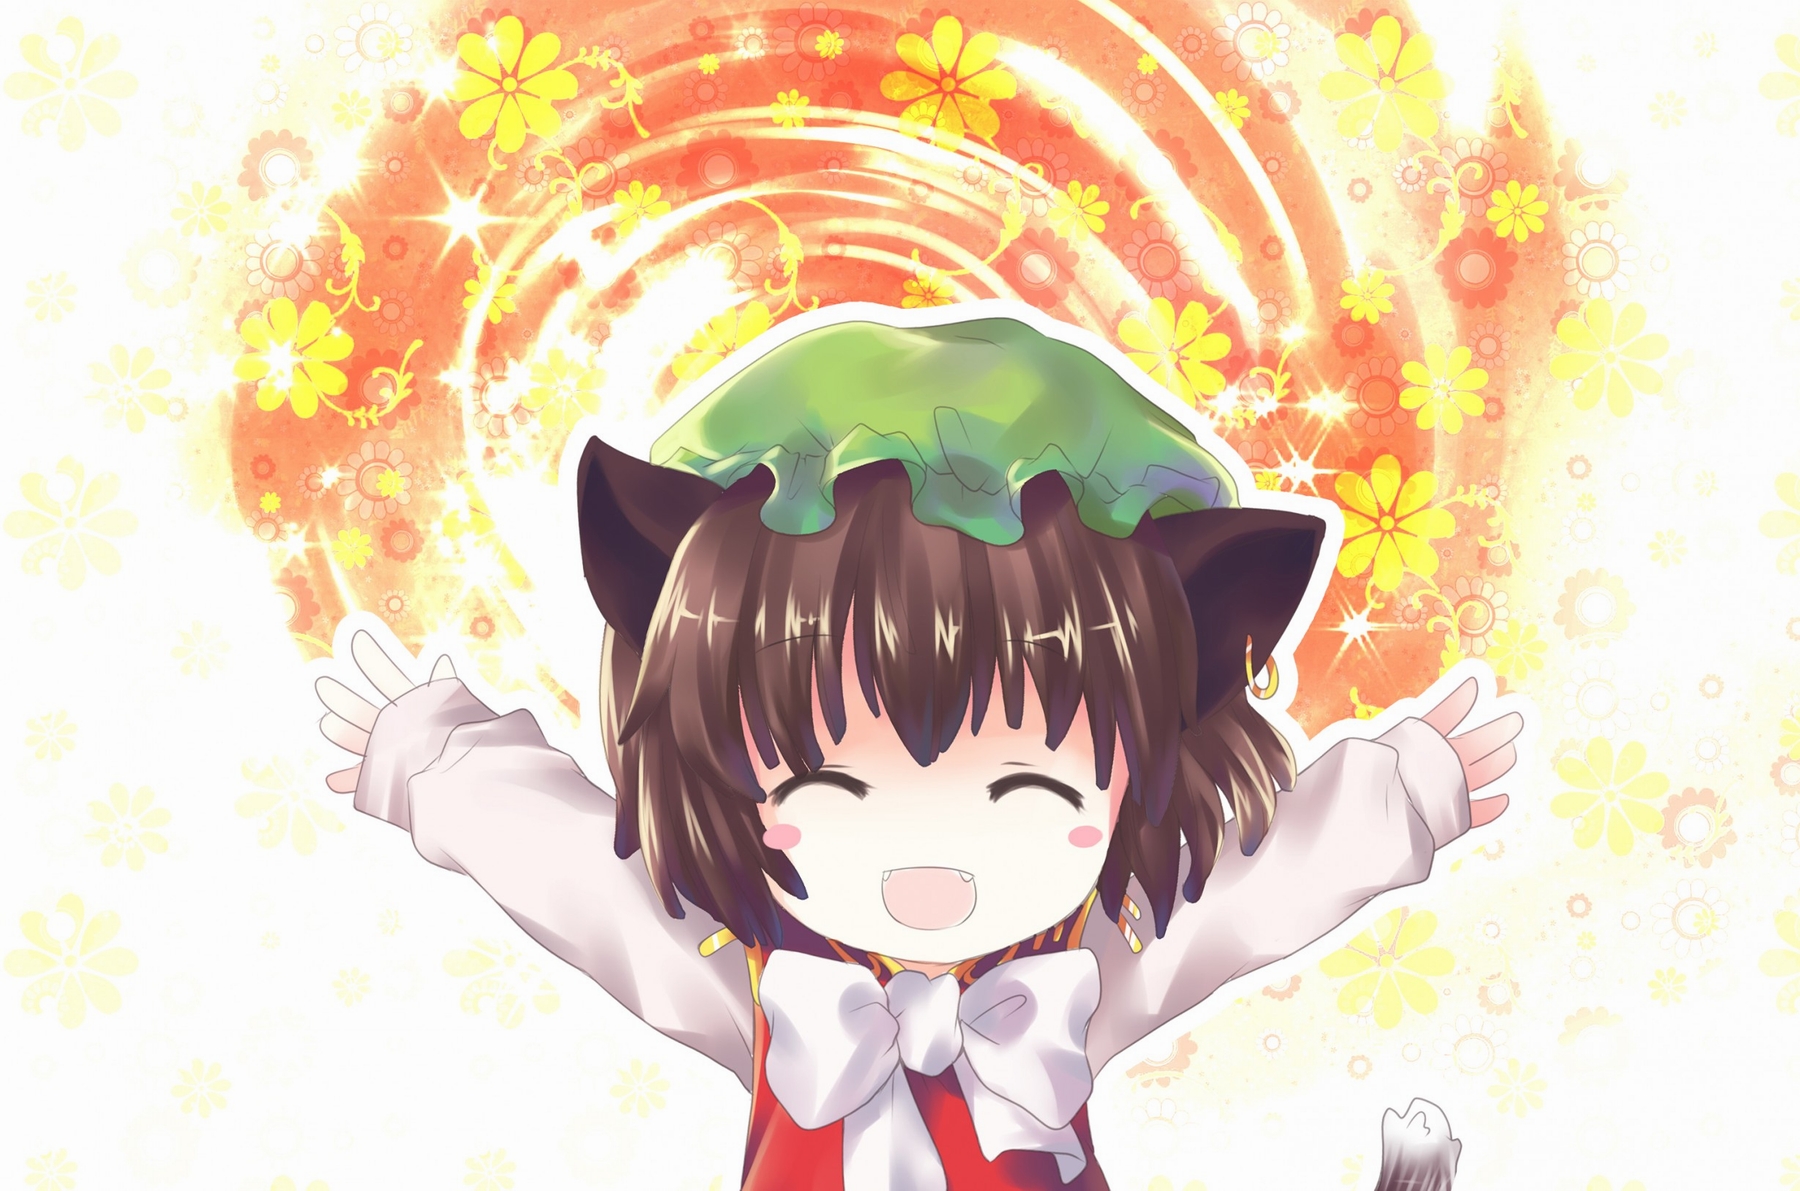 brunettes, Tails, Video, Games, Touhou, Flowers, Sparkles, Nekomimi, Animal, Ears, Short, Hair, Cat, Ears, Smiling, Blush, Bows, Open, Mouth, Fangs, Closed, Eyes, Chen, Cat, Tail, Hats, Children Wallpaper